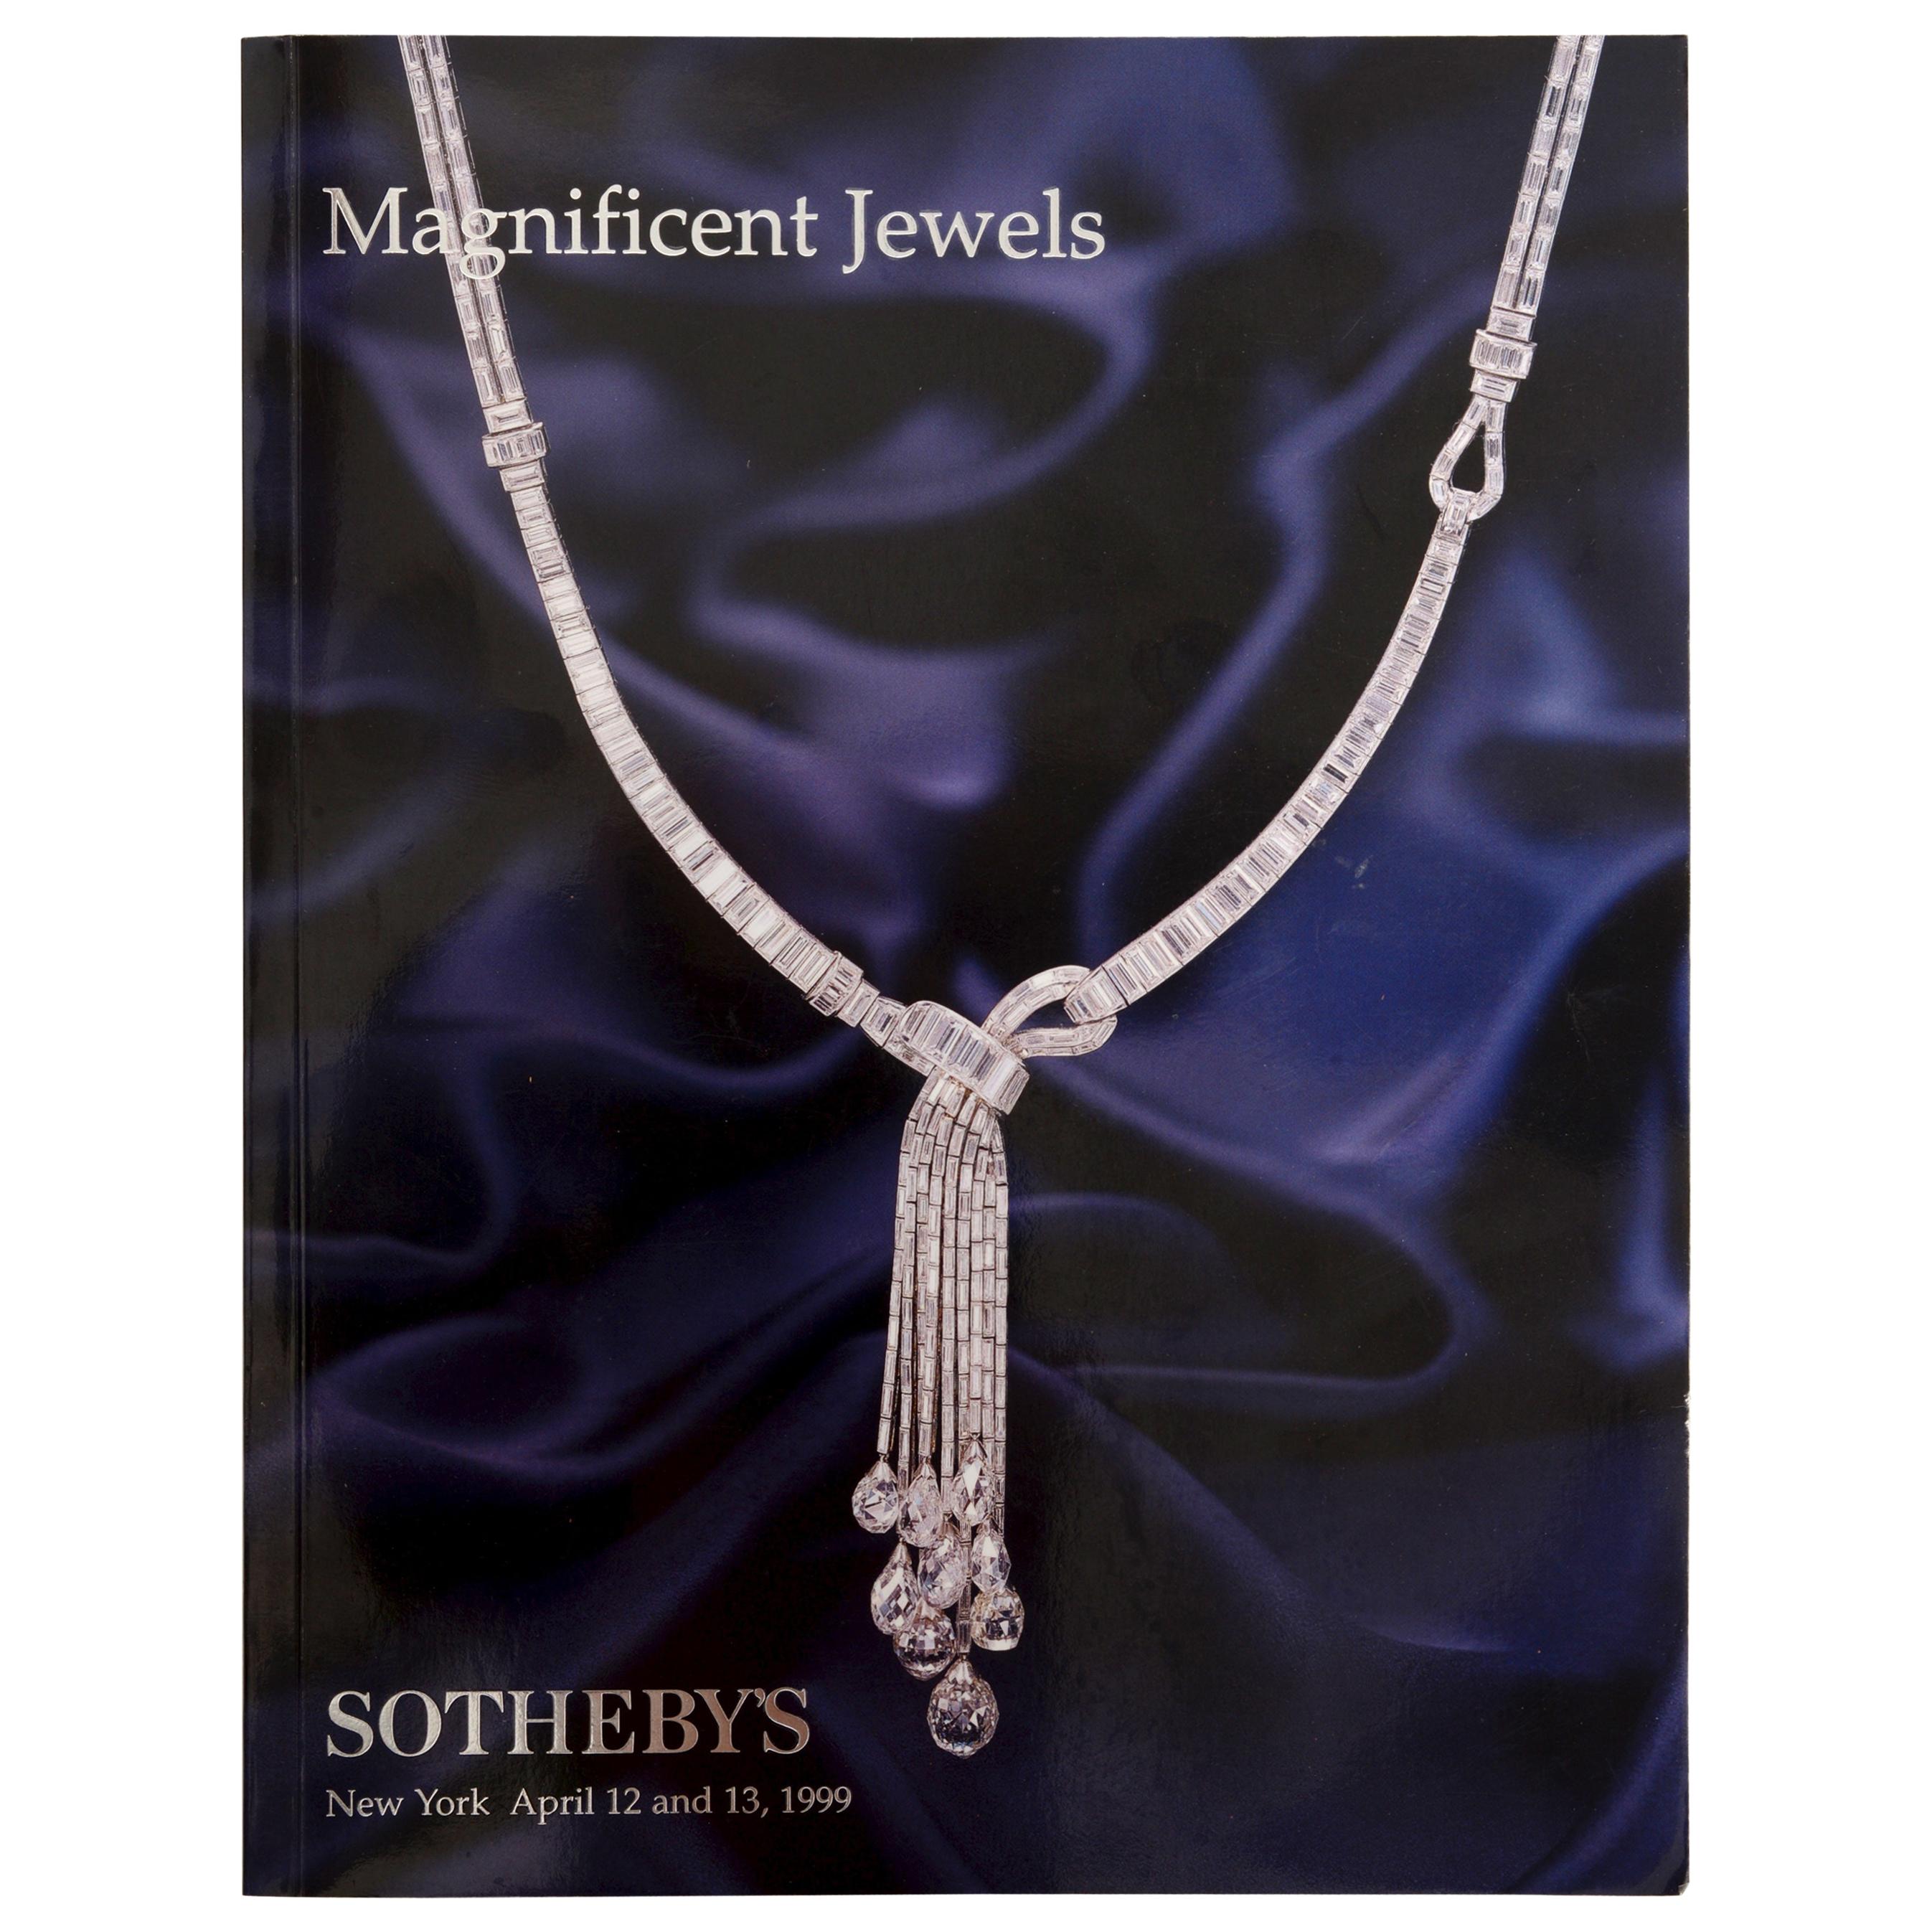  Sotheby's NY Magnificent Jewels April 1999, Property Wanda Toscanini Horowitz For Sale